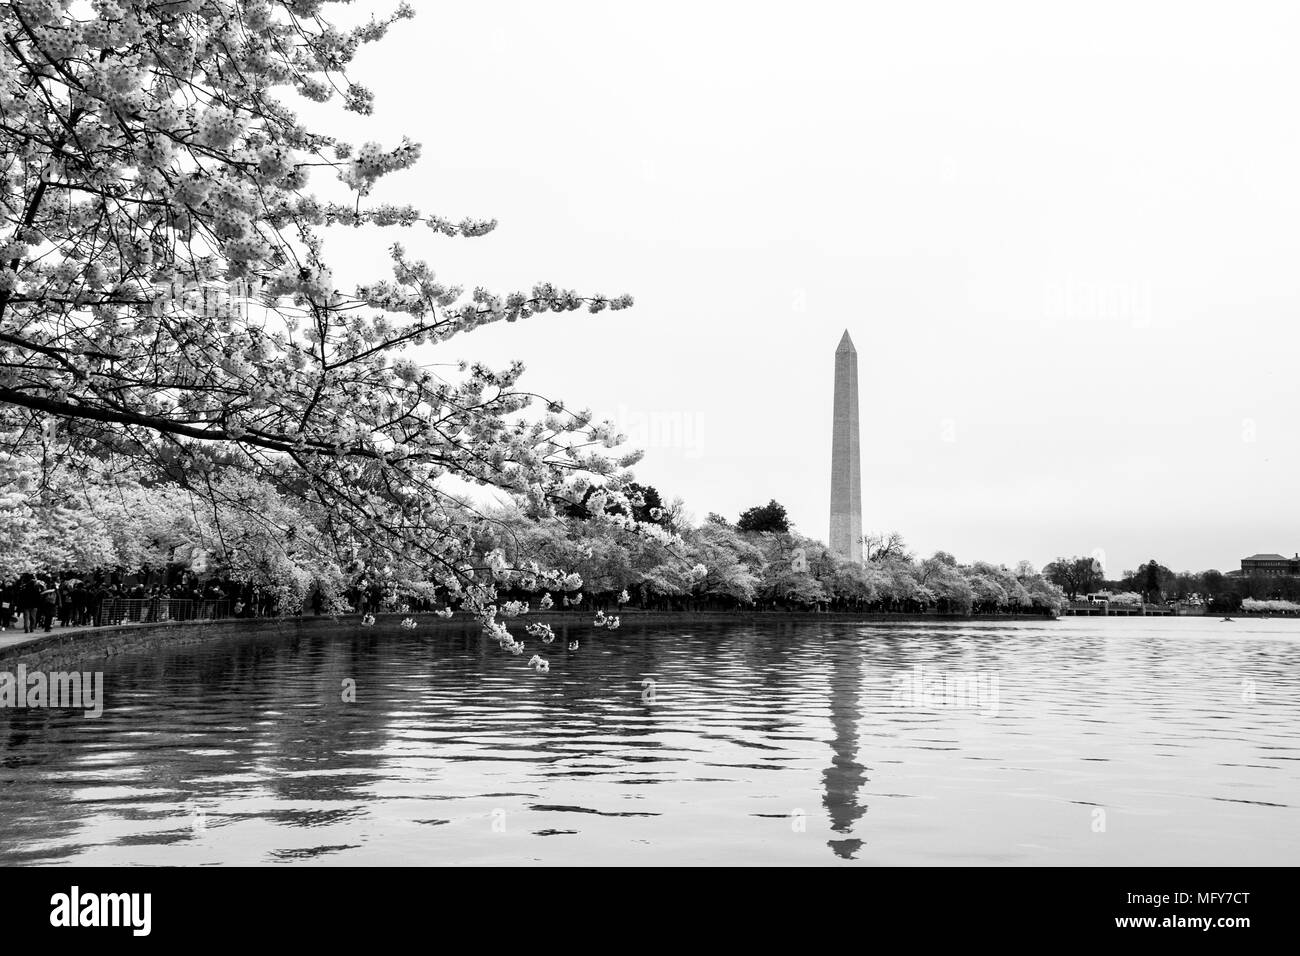 Washington Monument surrounded by cherry blossoms in peak season. Spring time in Washington DC. Stock Photo